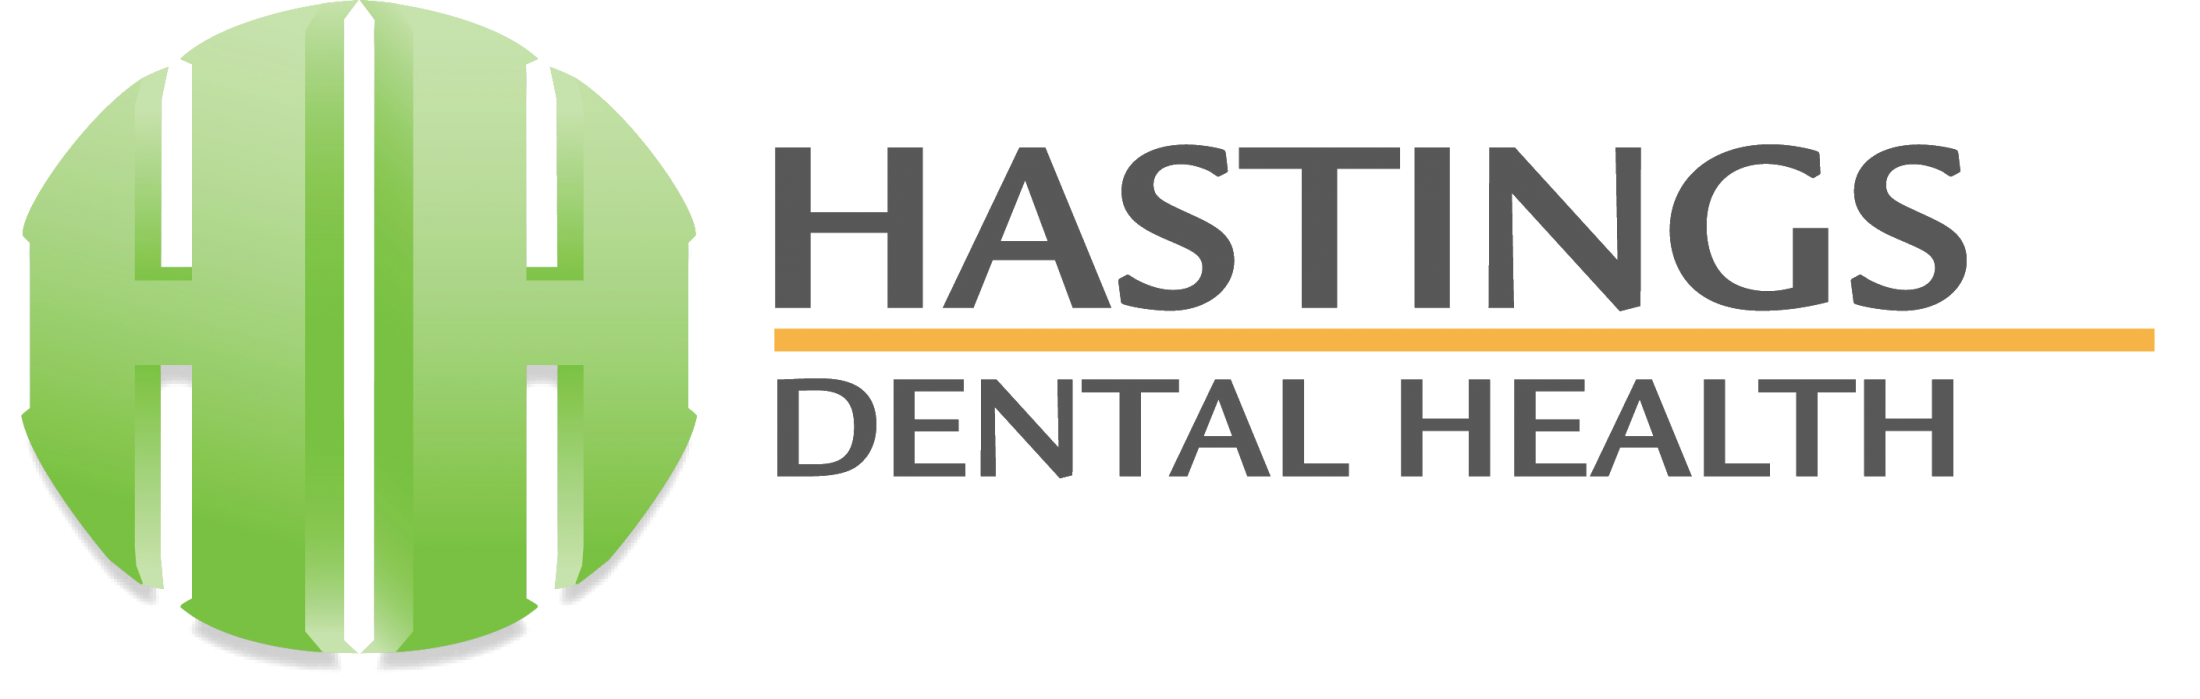 Link to Hastings Dental Health home page